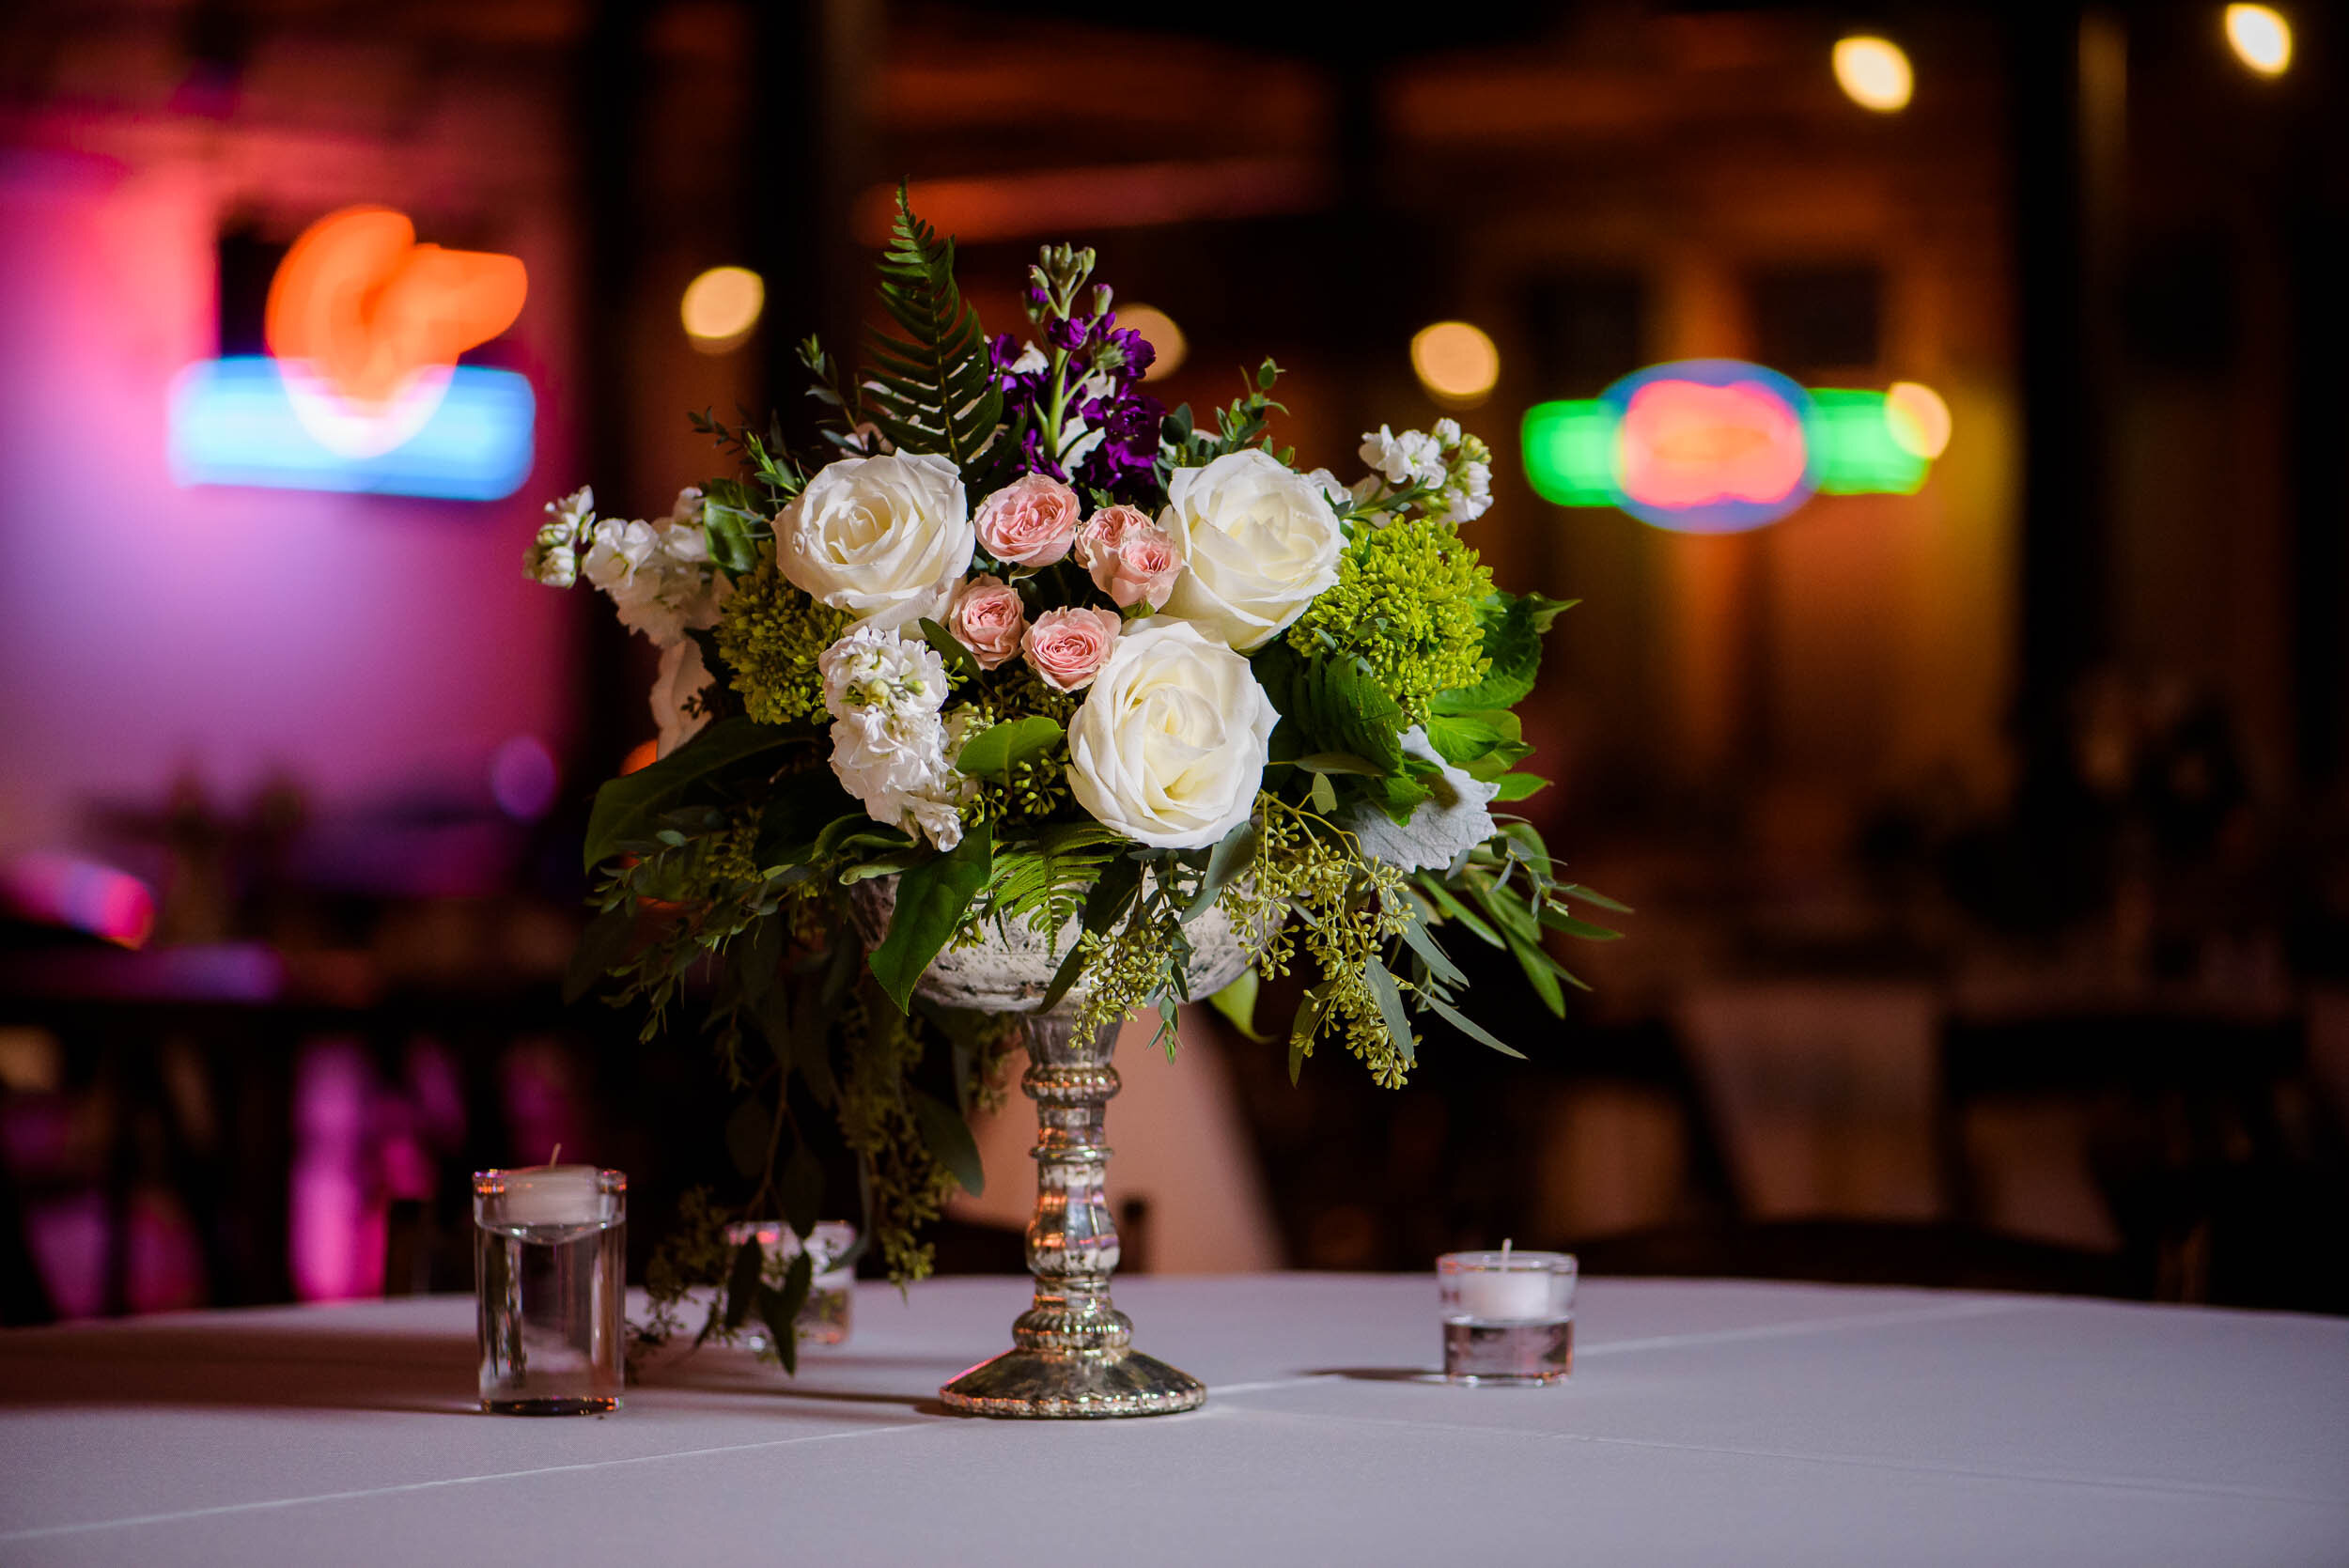 Wedding floral detail photo: Ravenswood Event Center Chicago wedding captured by J. Brown Photography.  